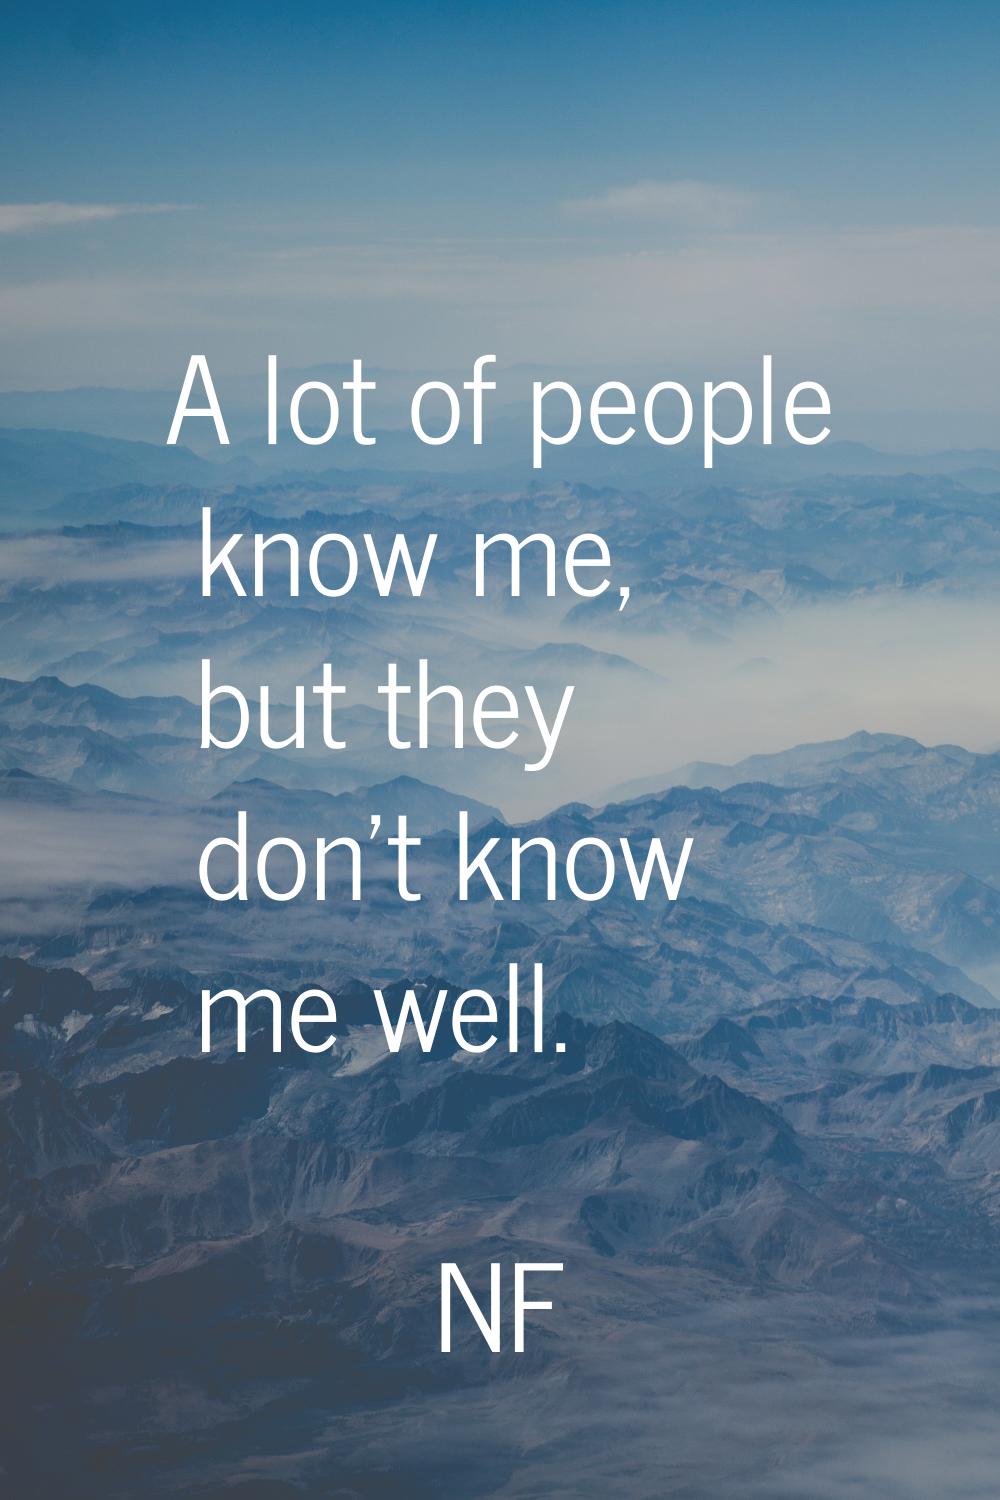 A lot of people know me, but they don't know me well.